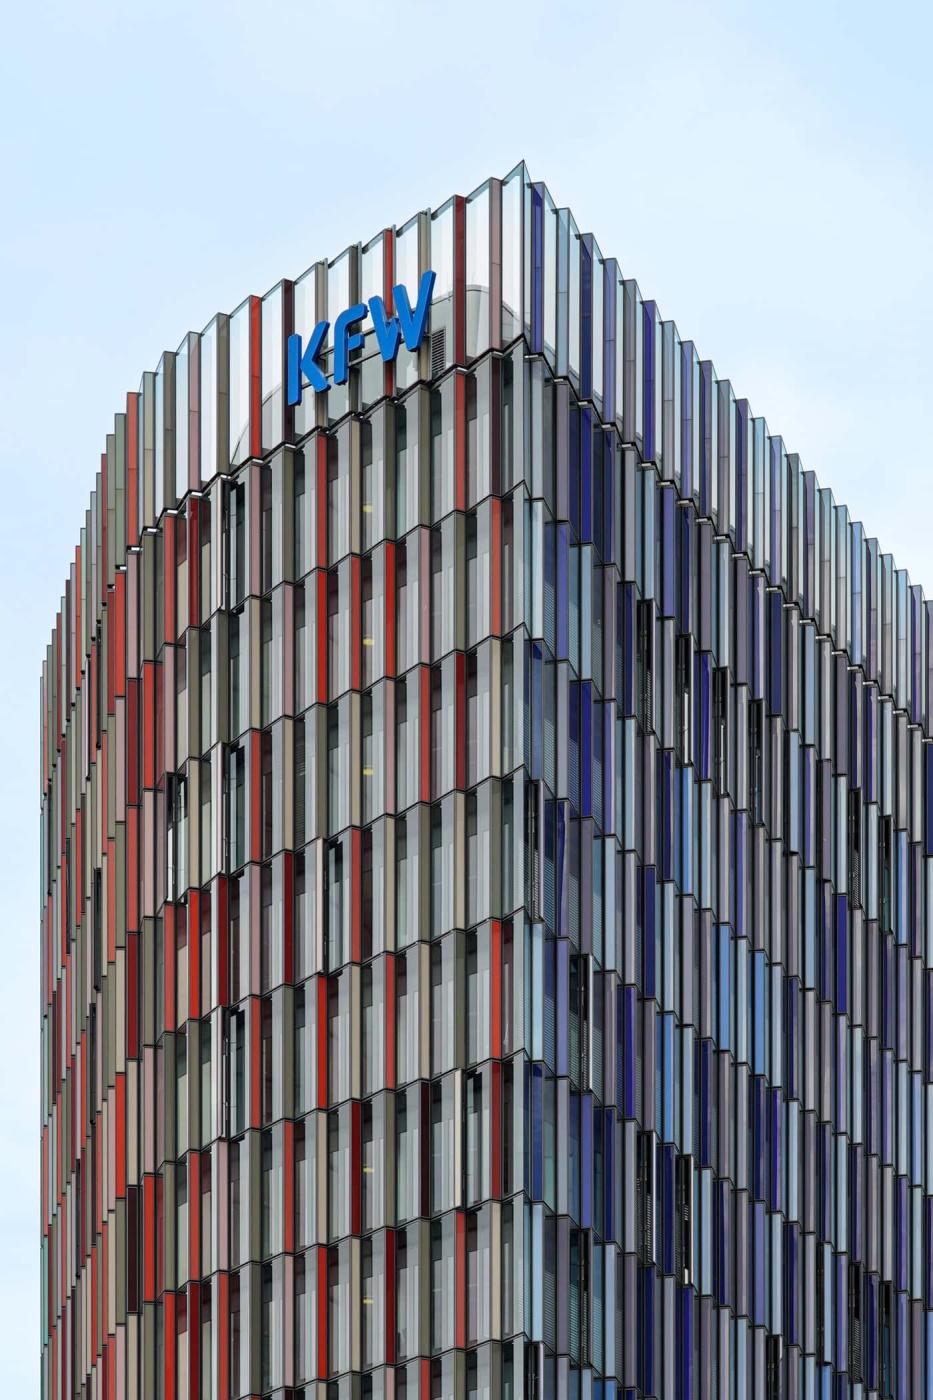 Thumbnail of New high-profile work by Michael Nguyen on the KfW building in Frankfurt am Main